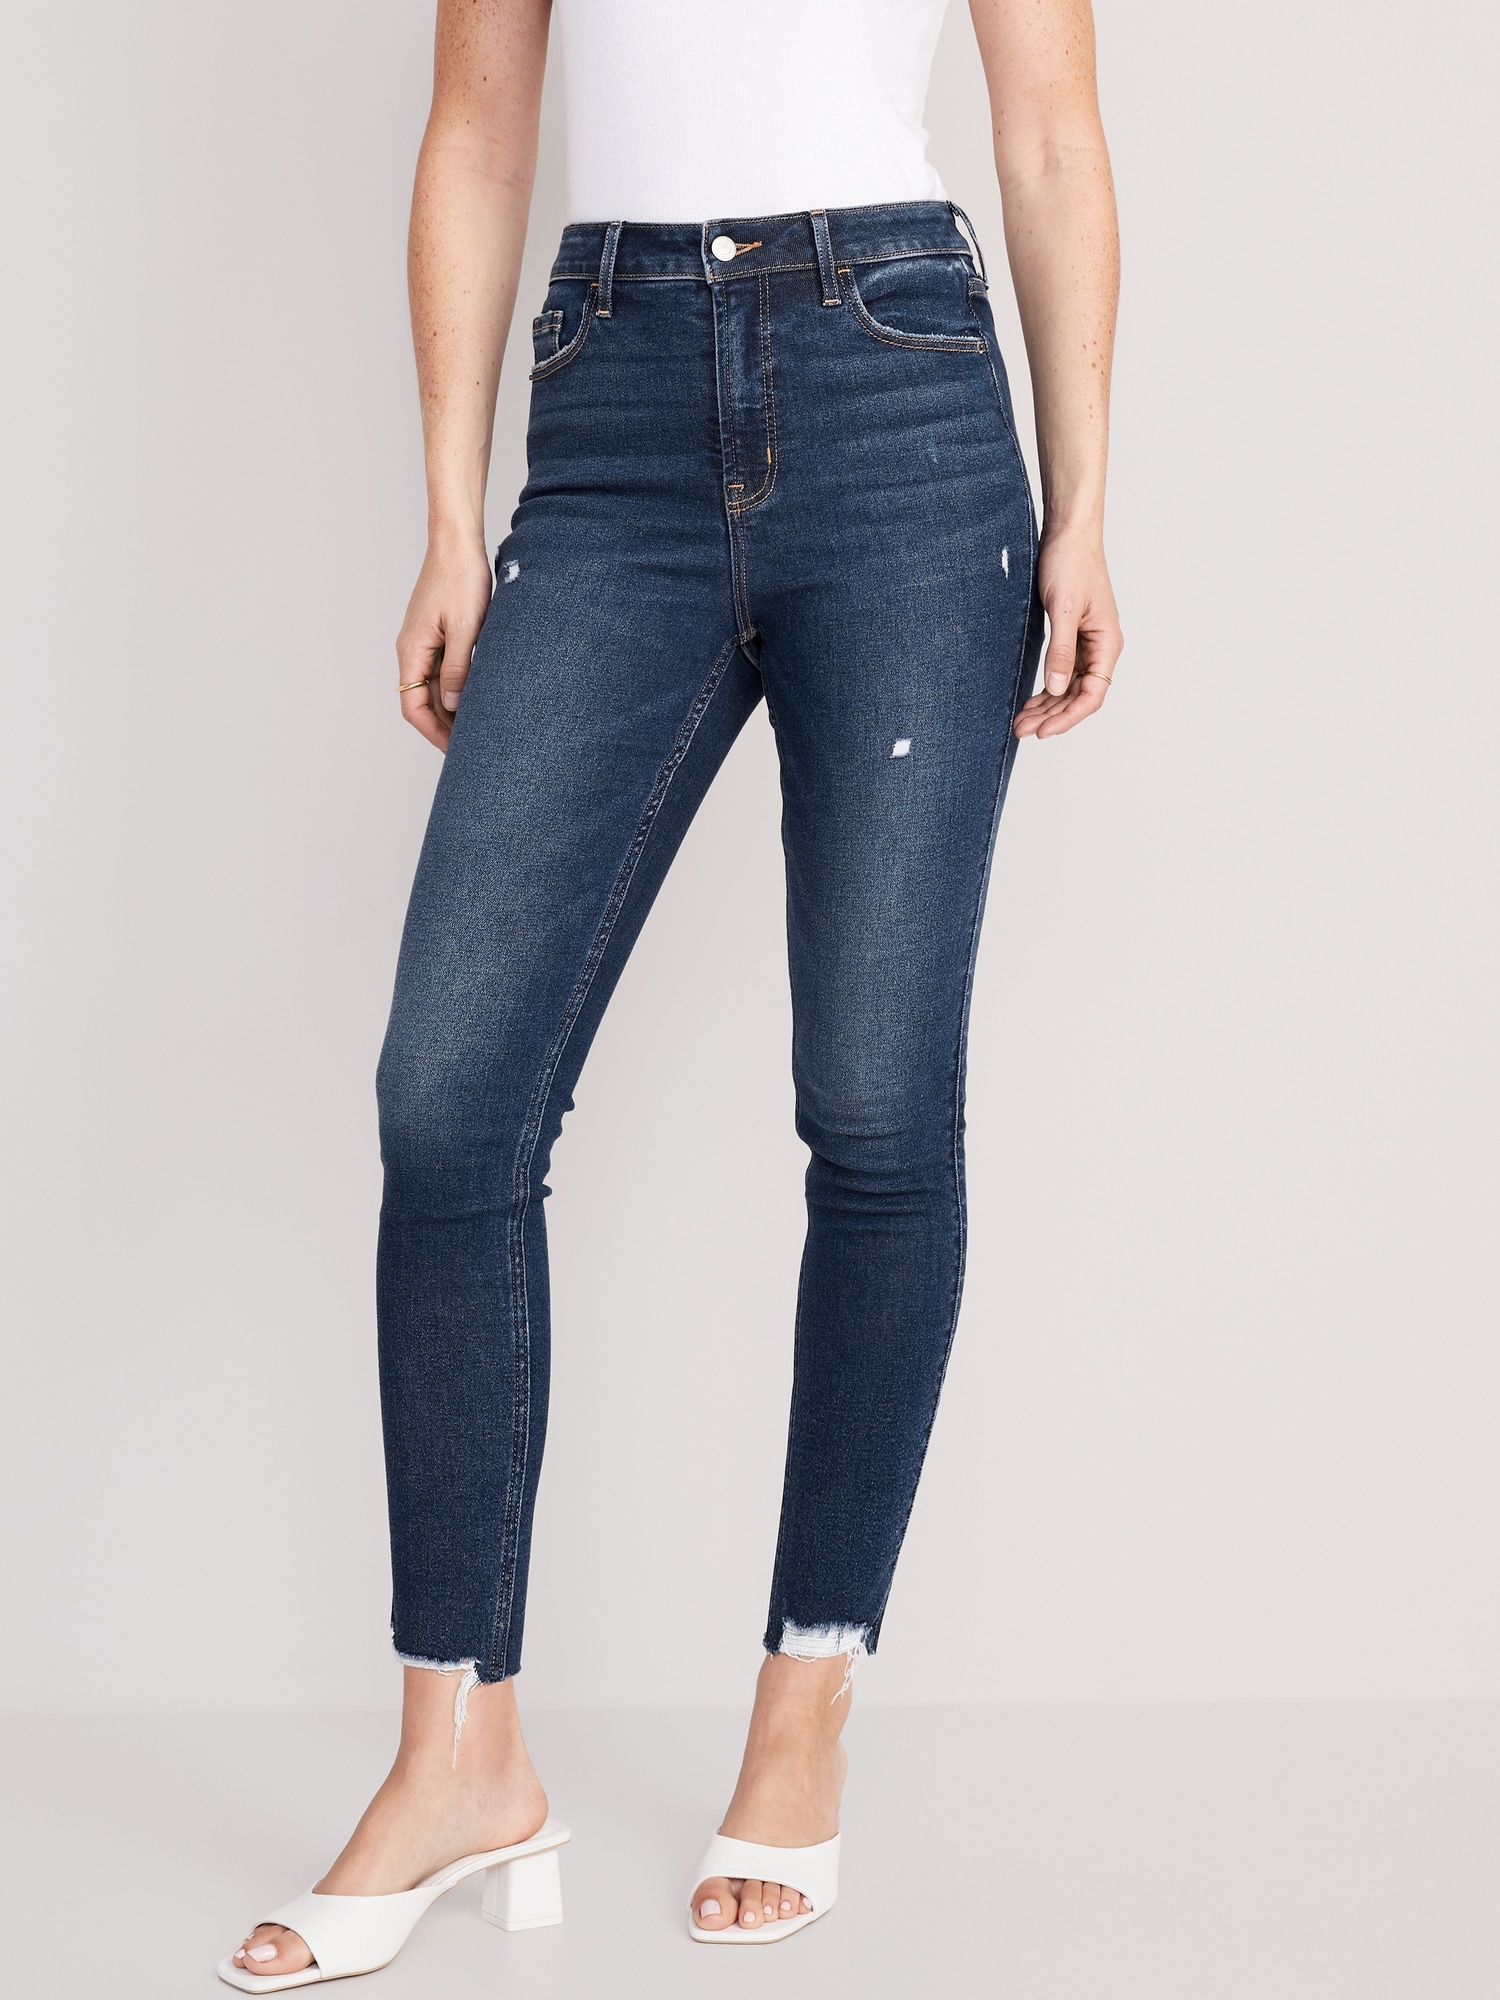 Extra High-Waisted Rockstar 360° Stretch Cut-Off Super-Skinny Ankle Jeans